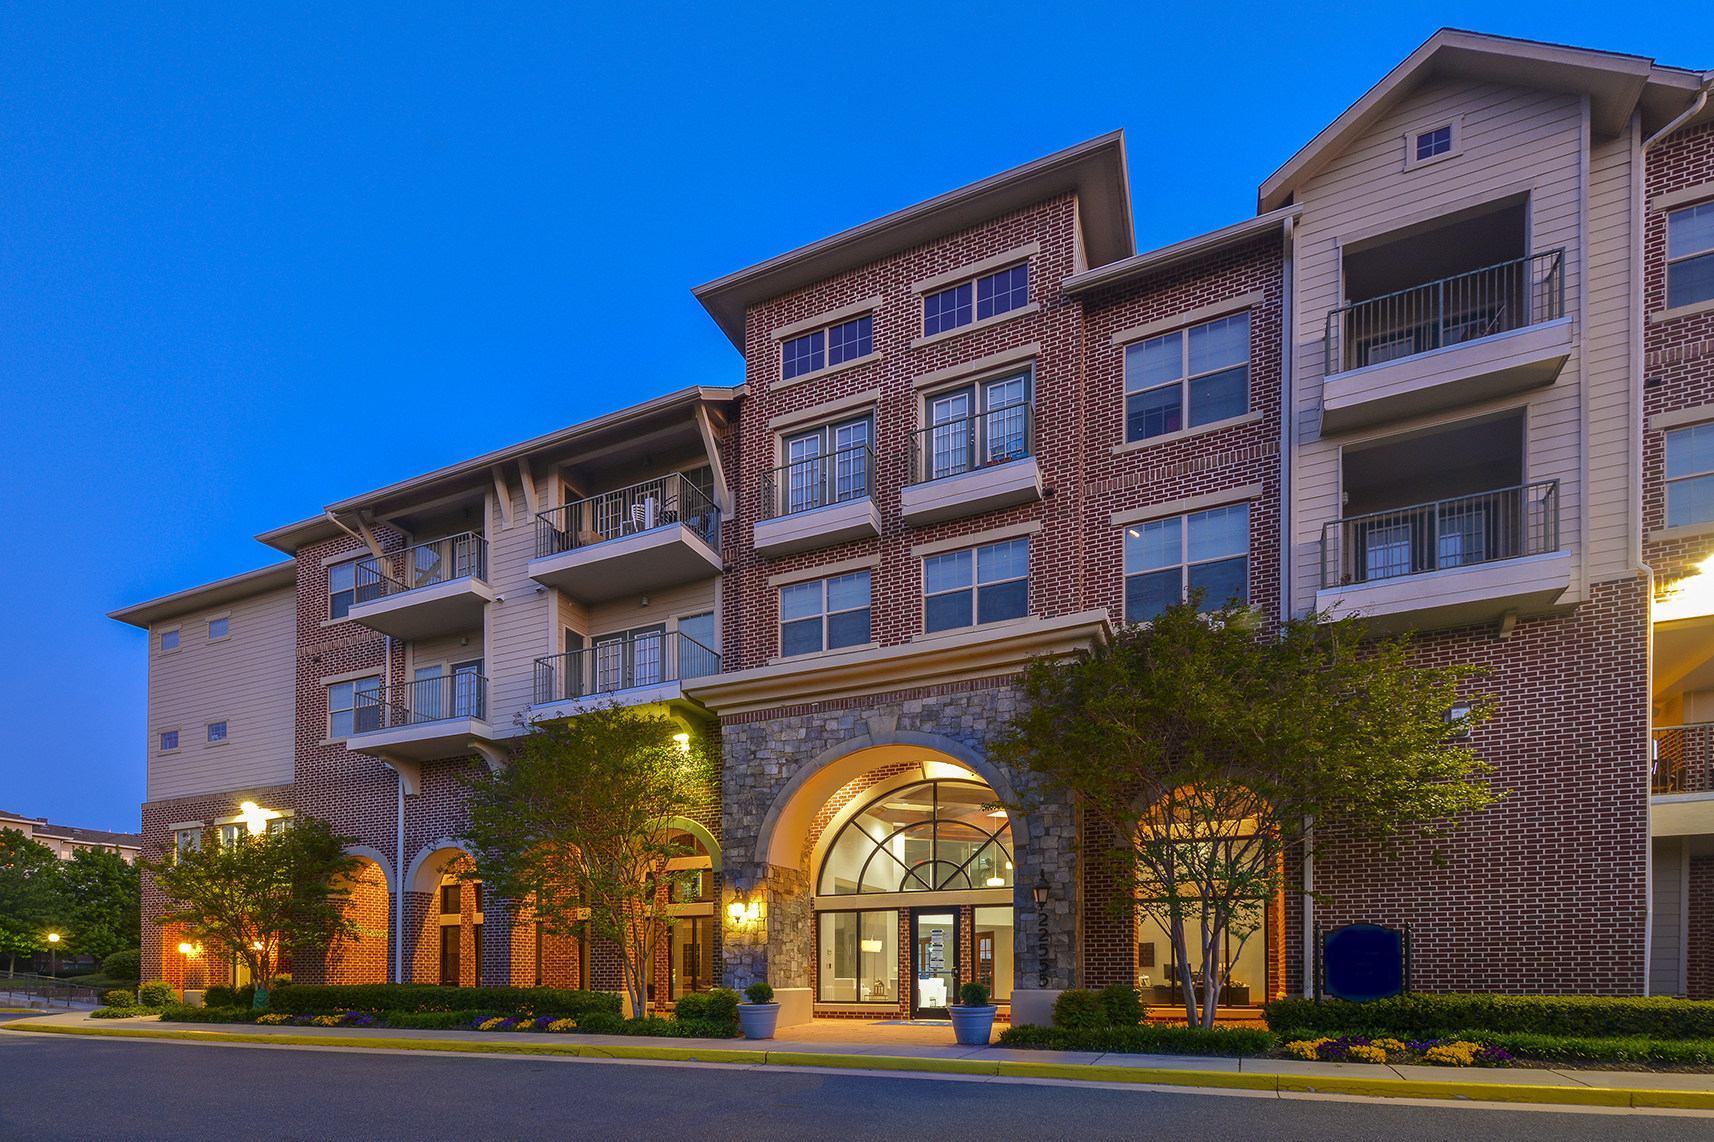 TGM Acquires Fourth Multifamily Community in Virginia with Purchase of TGM Moorefield Apartments in Ashburn Neighborhood